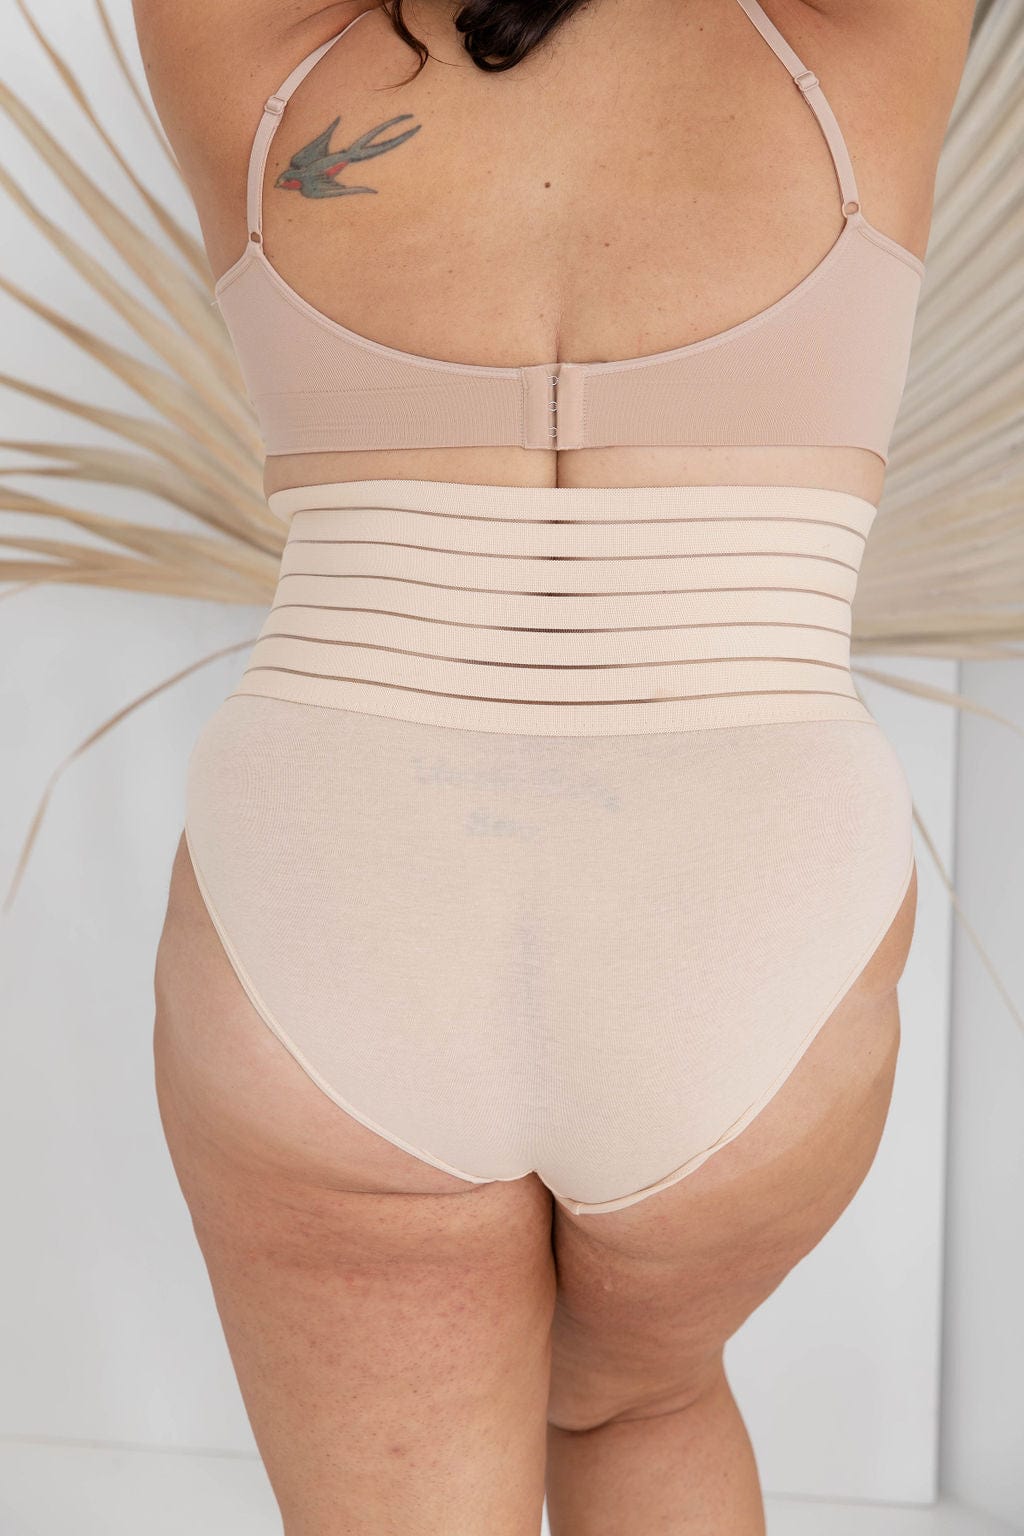 Naked Curve Underwear High Waisted Shaping Nude Underwear